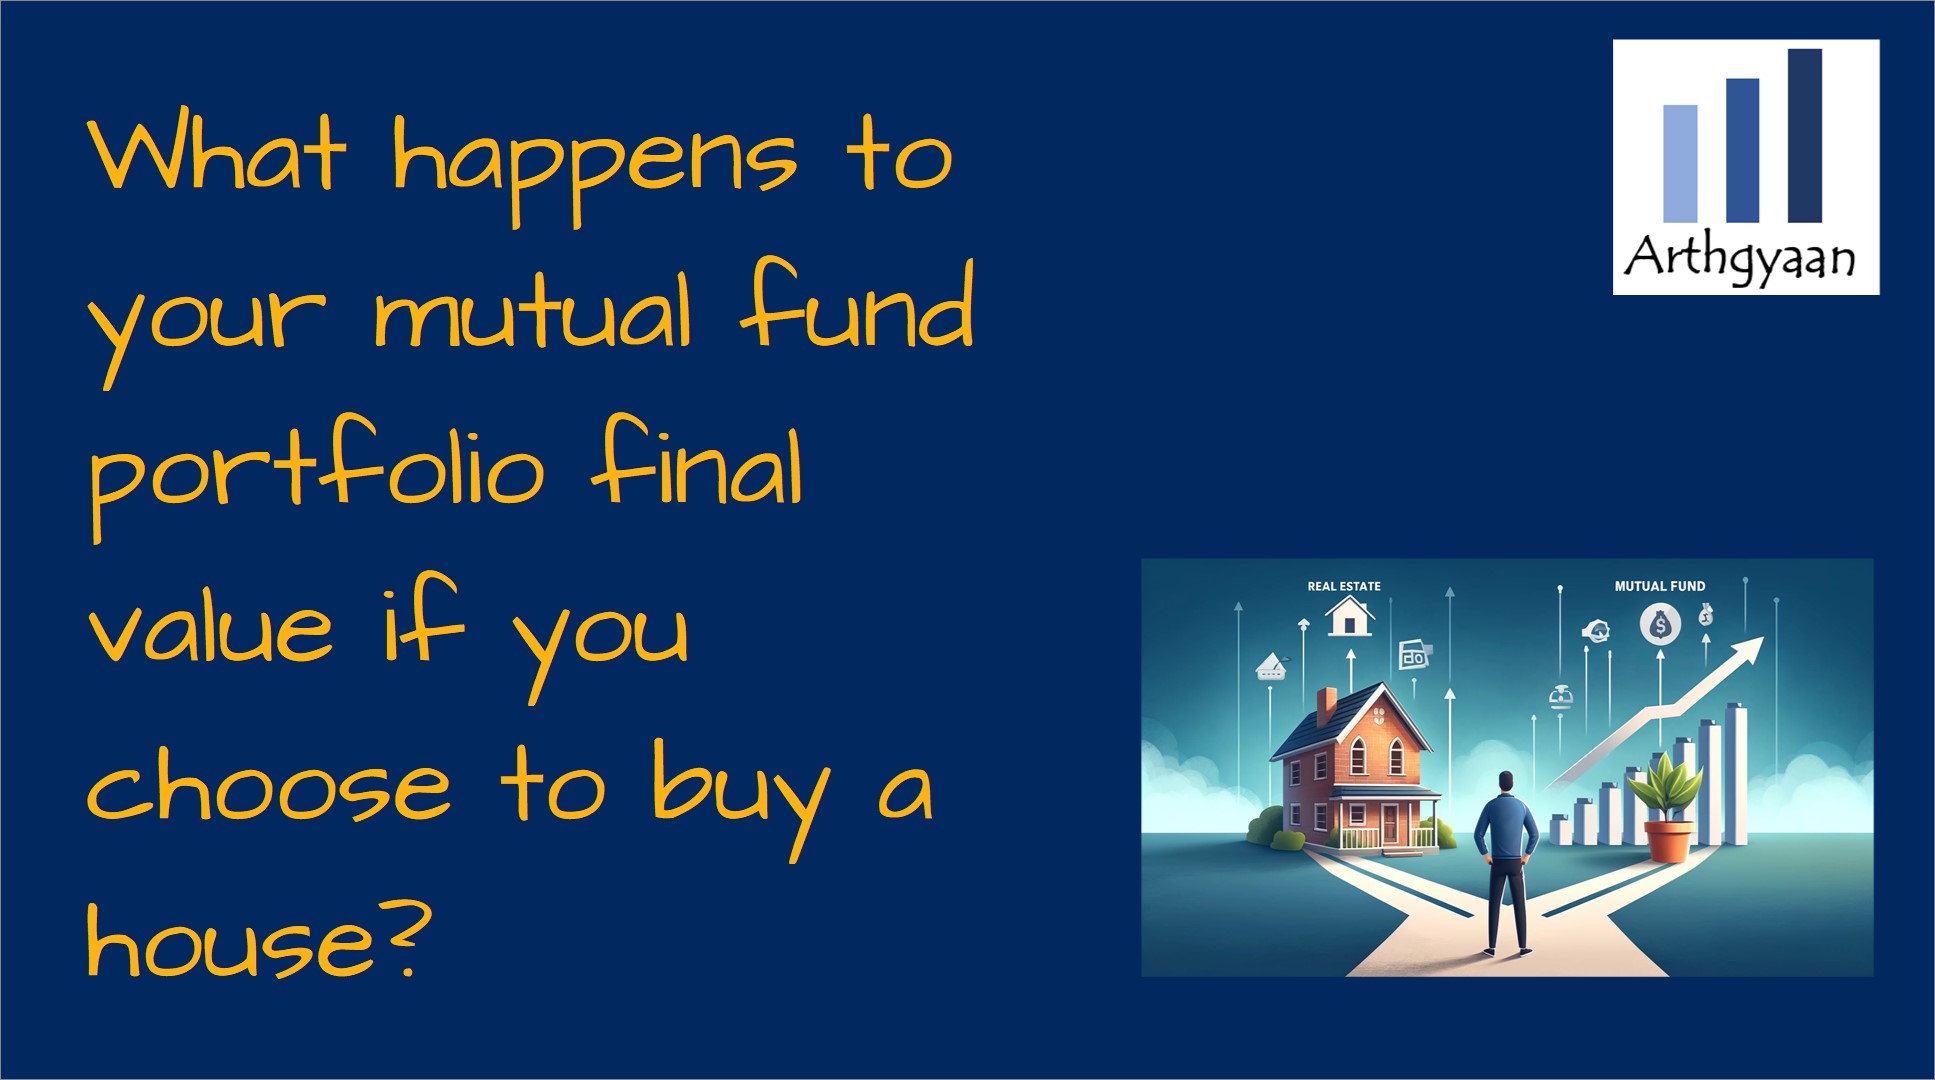 What happens to your mutual fund portfolio final value if you choose to buy a house?